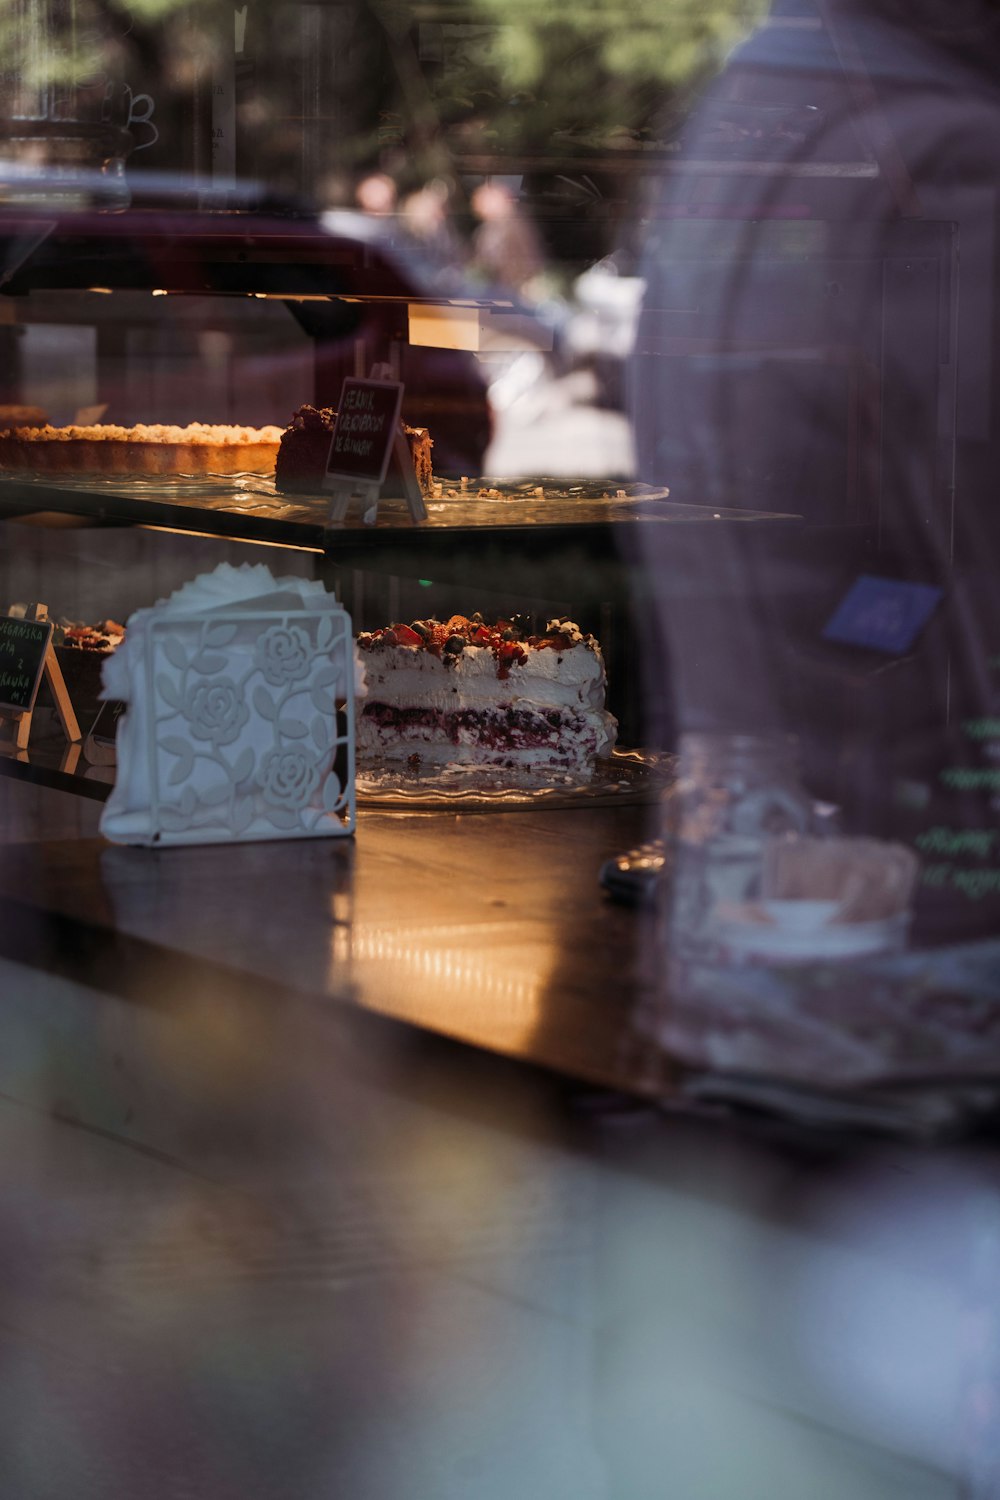 a close up of a cake behind a glass